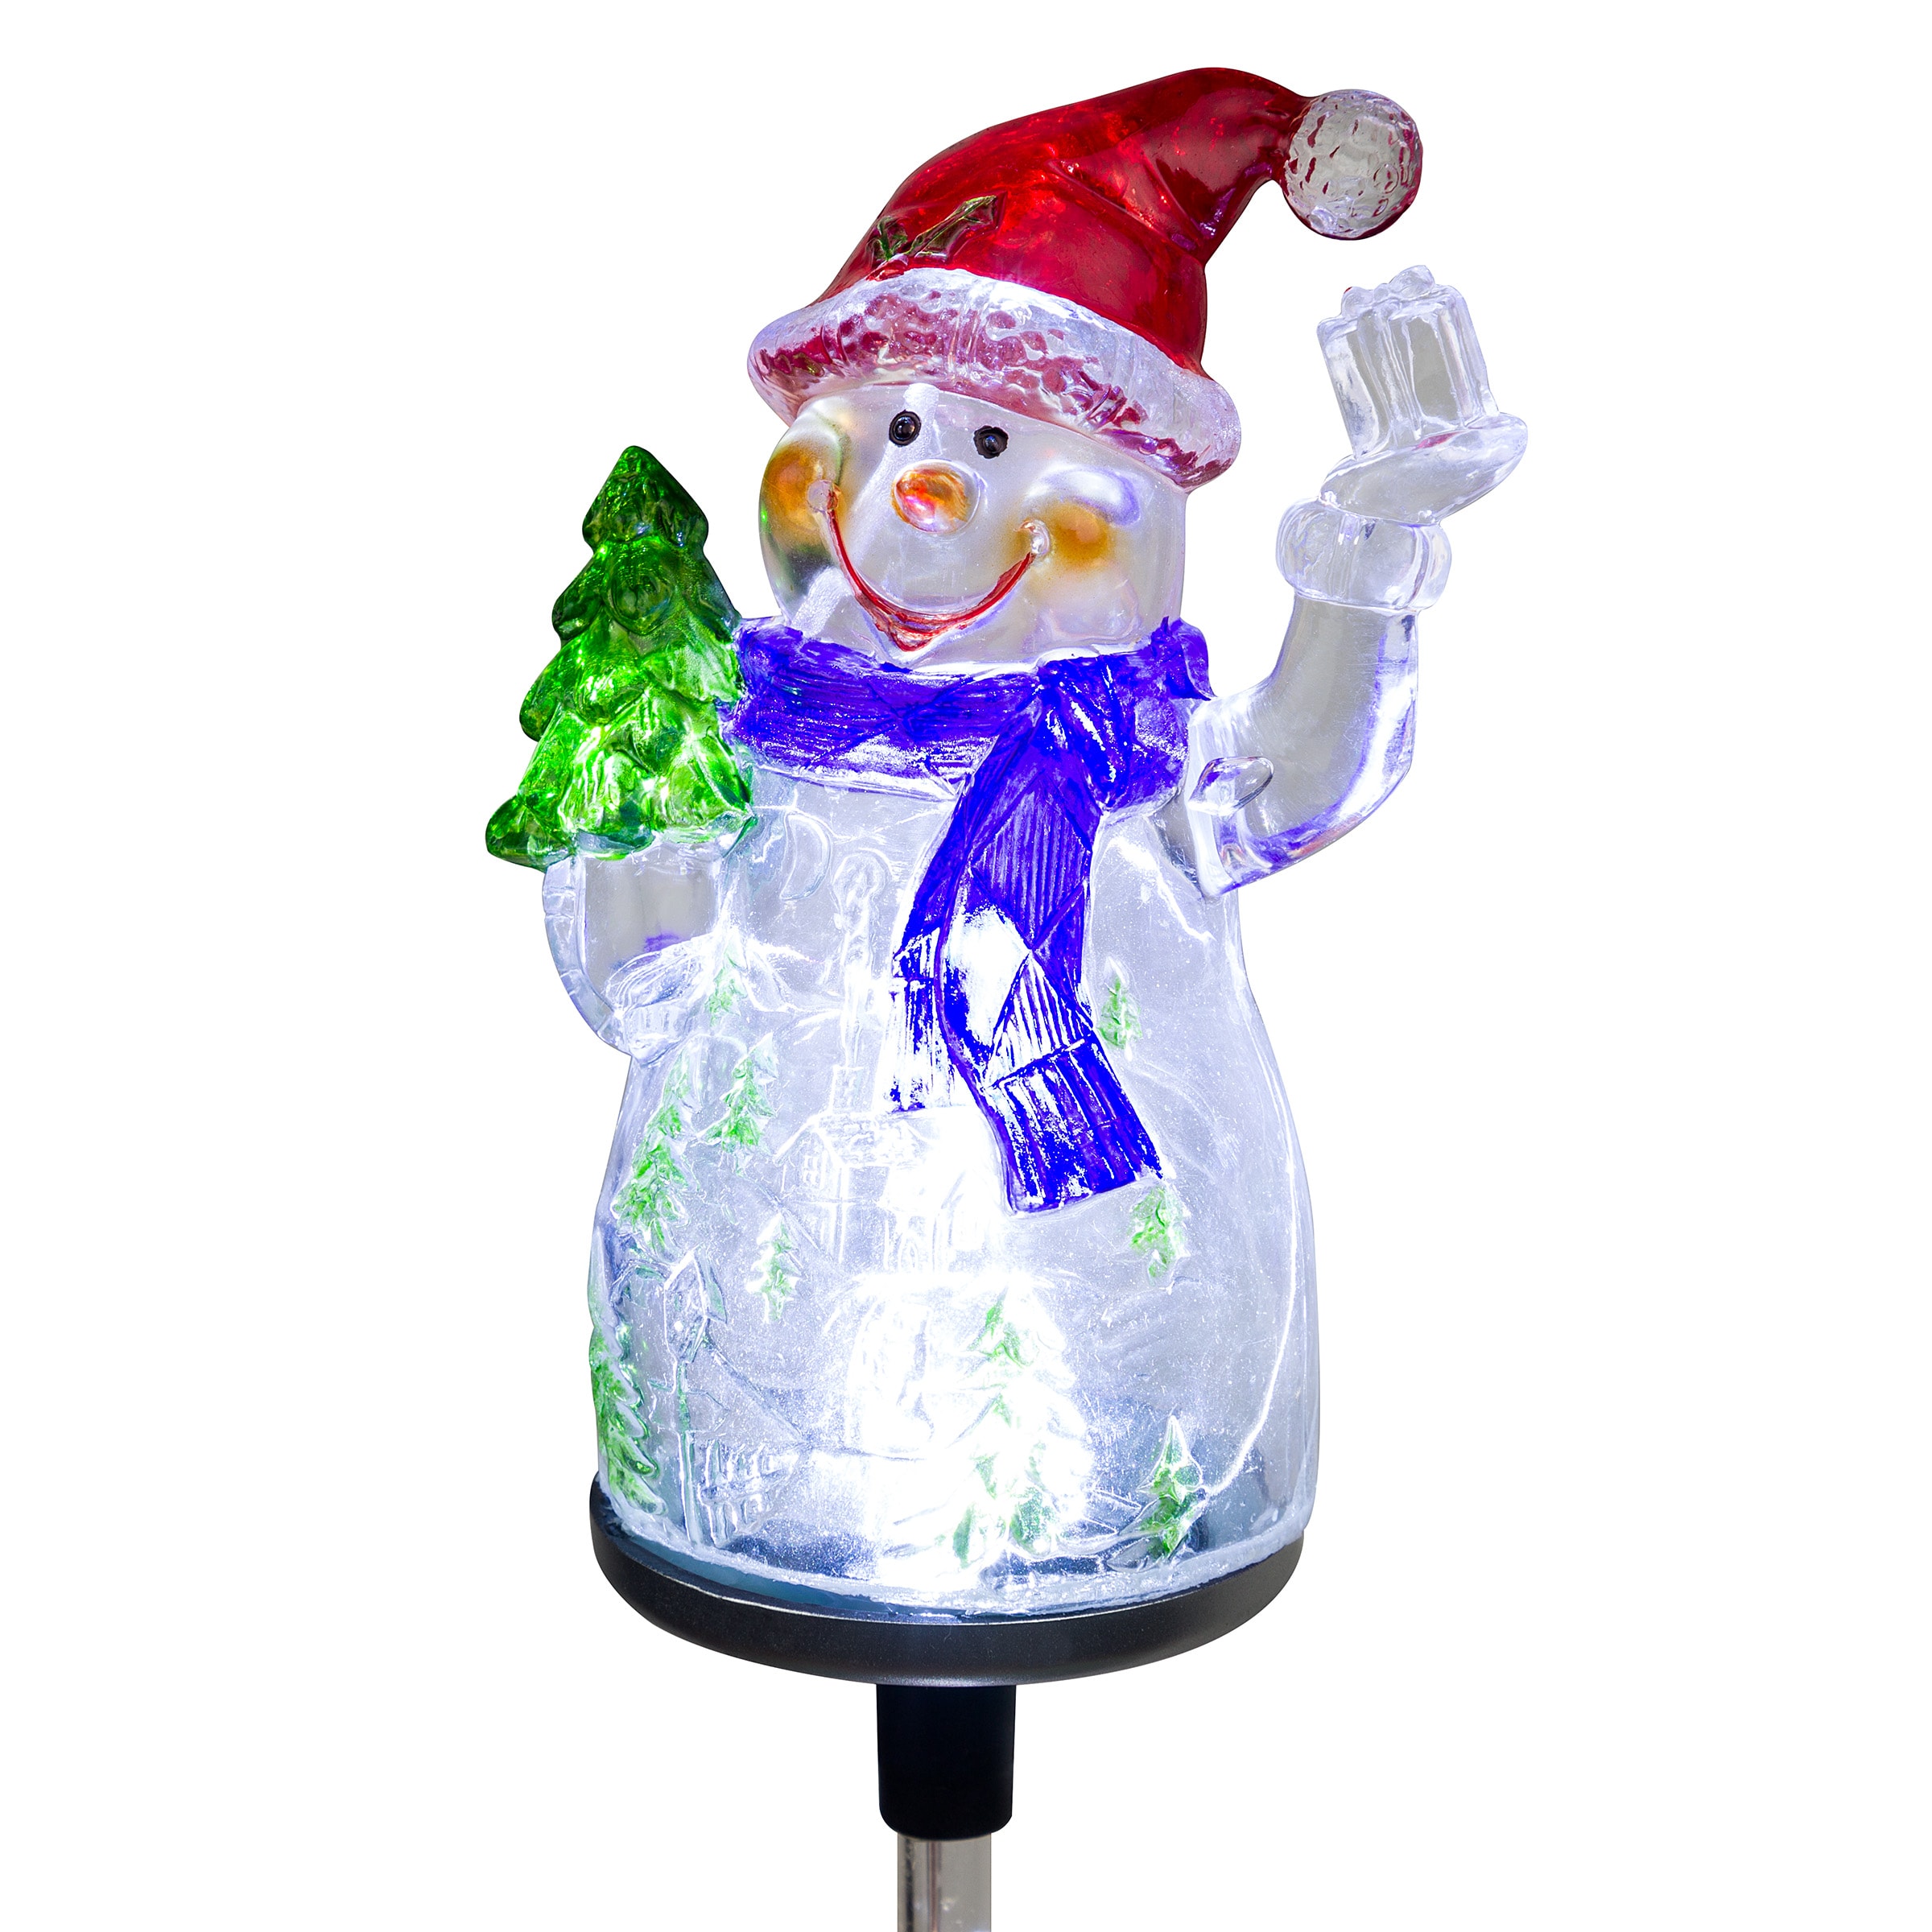 8"H 5 Piece Lighted Snowman Driveway Markers Illuminated by 10 lights 